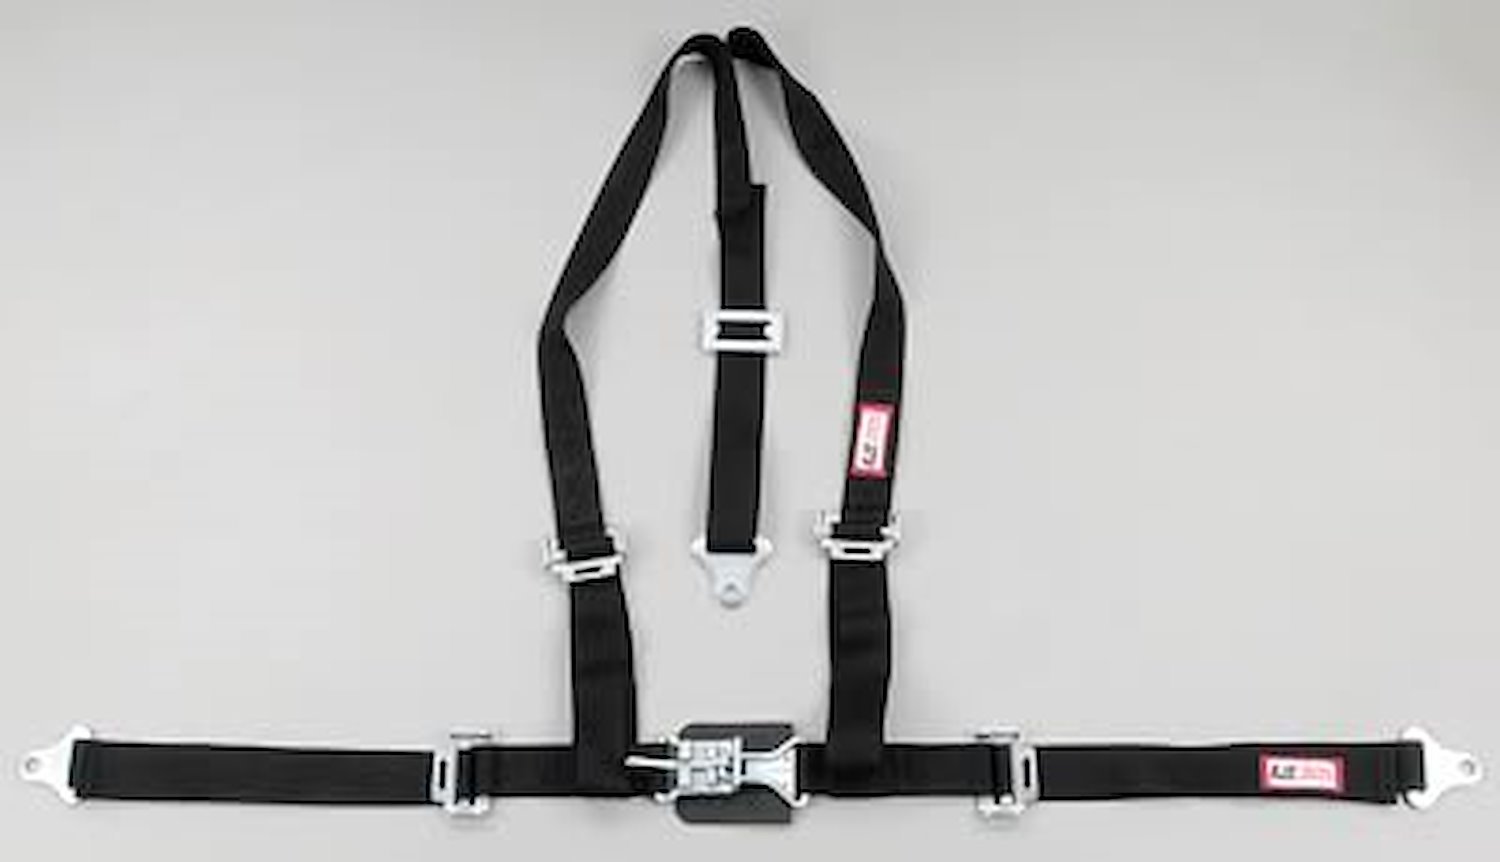 NON-SFI L&L HARNESS 2 PULL DOWN Lap Belt SNAP SEWN IN 2 S.H. Individual ROLL BAR Mount w/STERNUM STRAP WRAP/SNAP BLUE